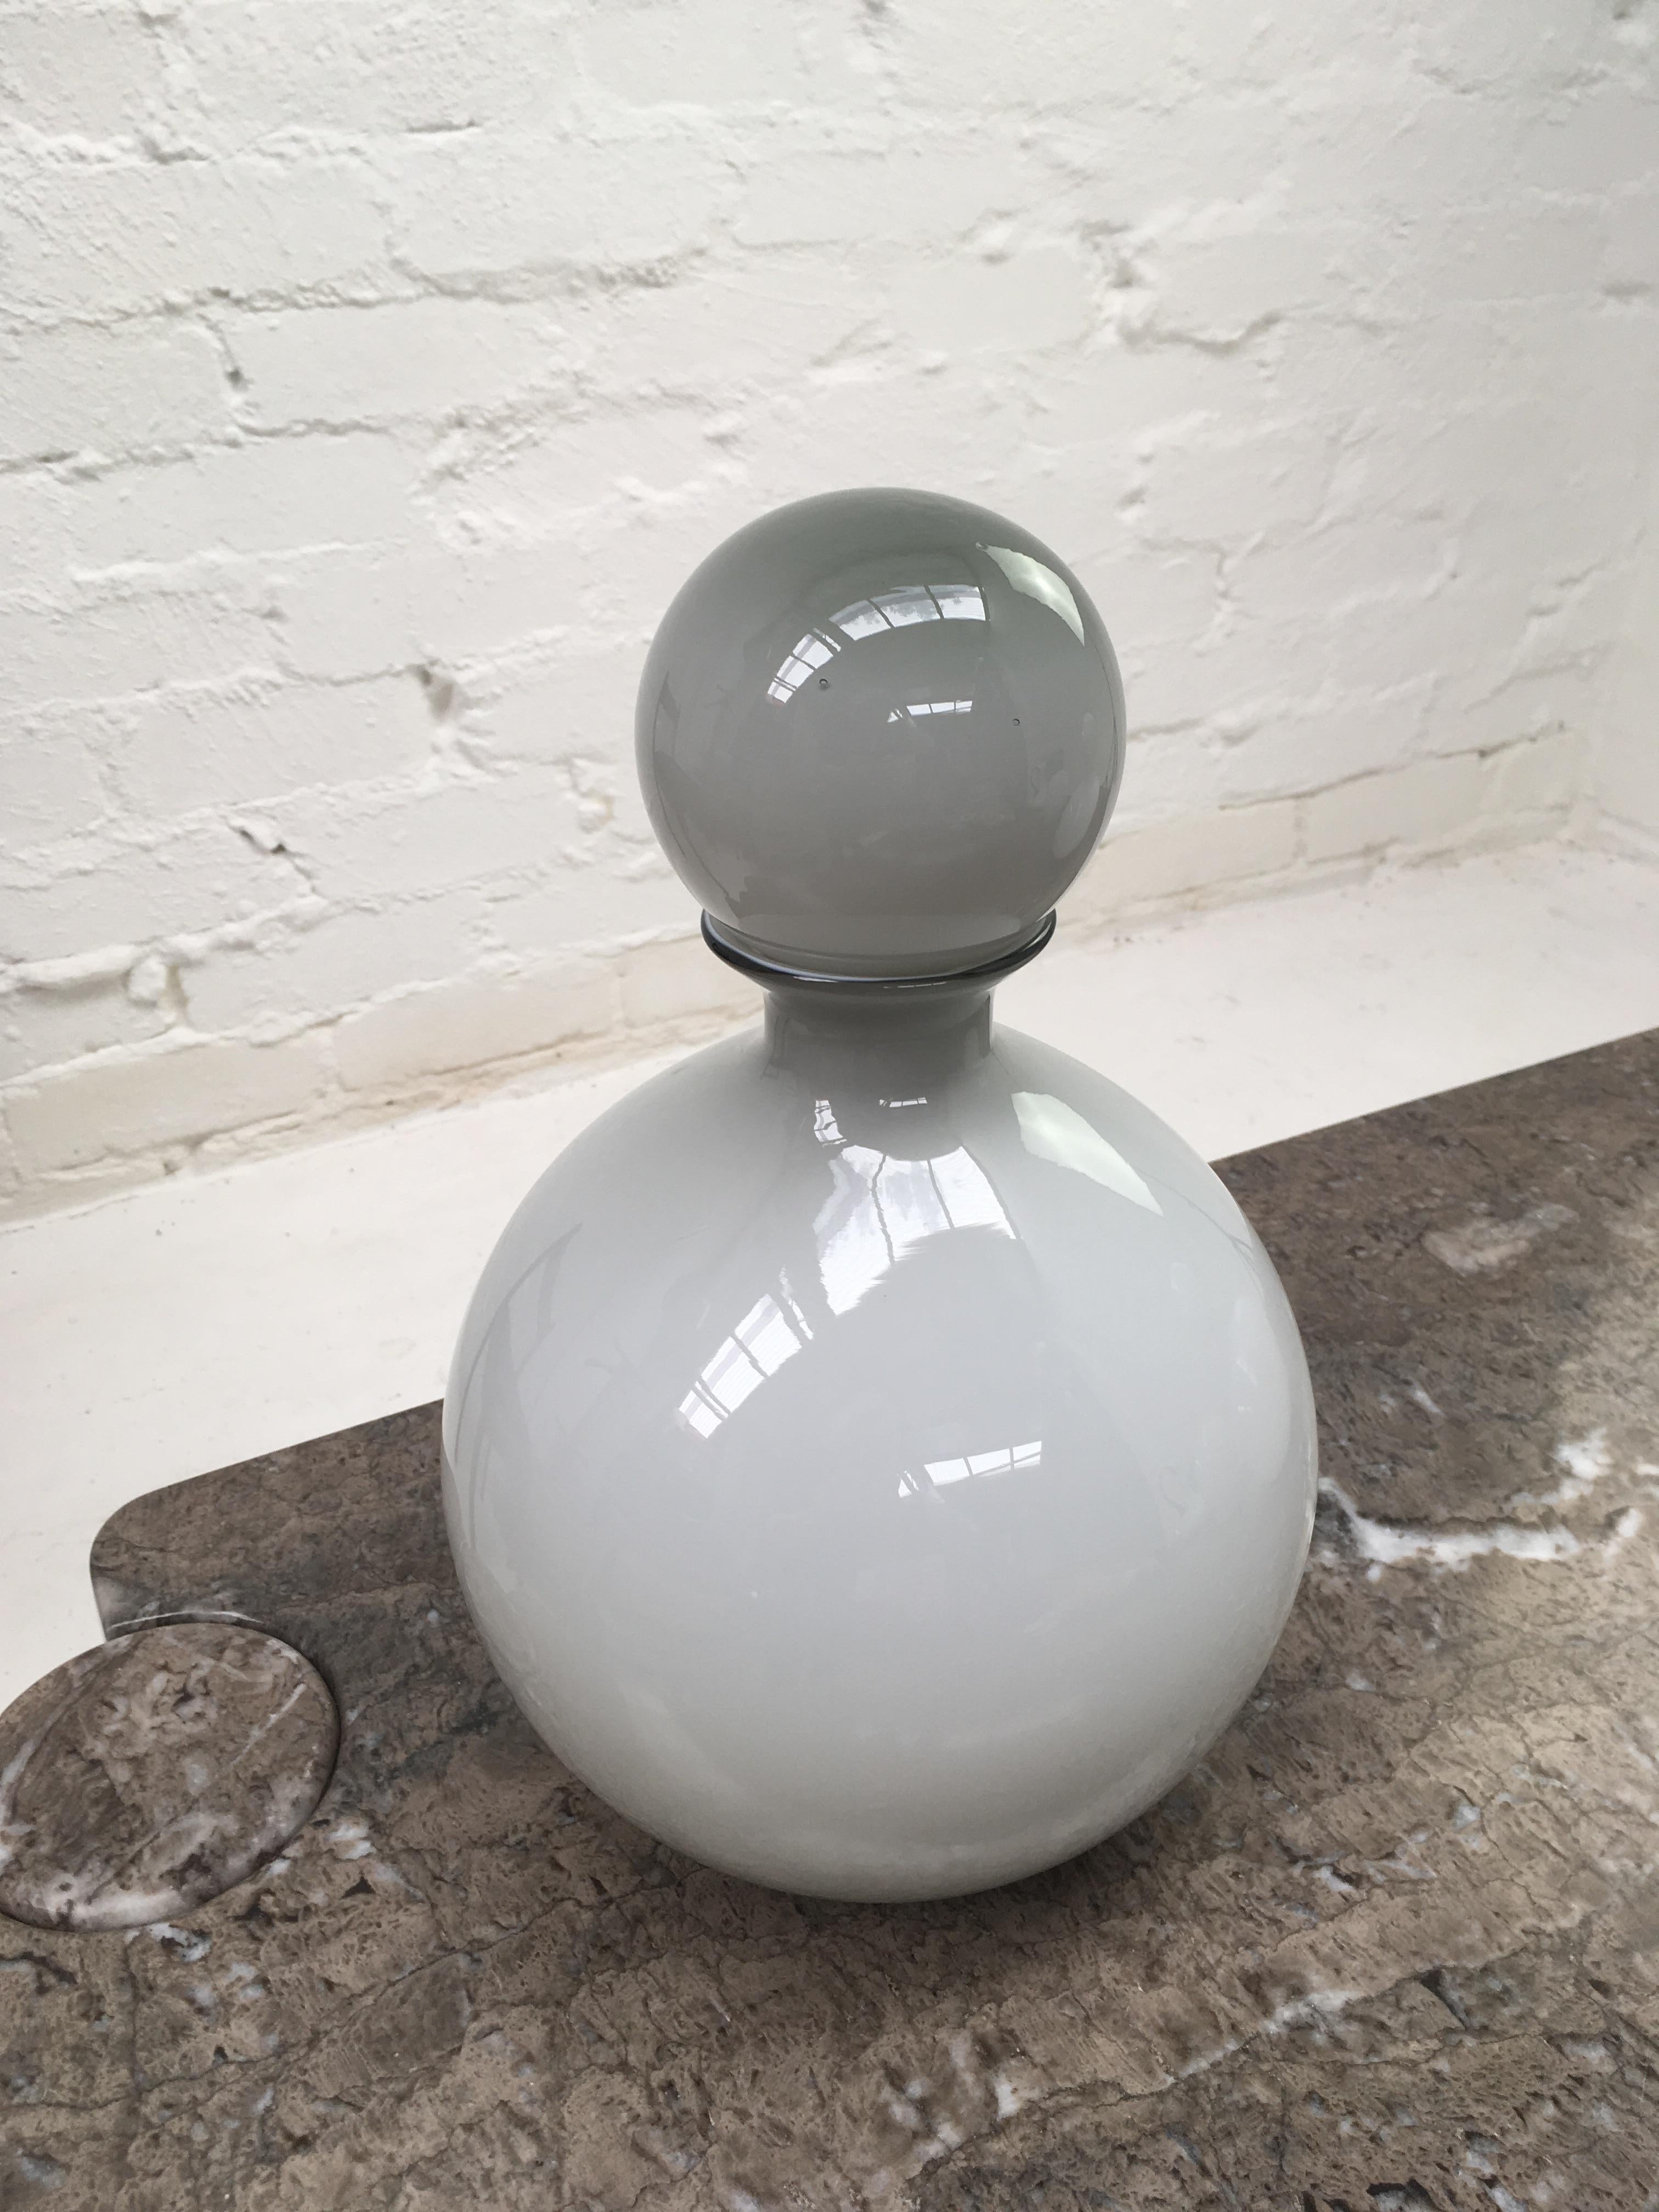 A cased glass ball-stoppered bottle in Empoli* glass. The light Grey glass graduates in thickness which give a very pleasing Ombre colour effect. 

It's in very good condition and while it is not the largest size we've seen, it is still generous -